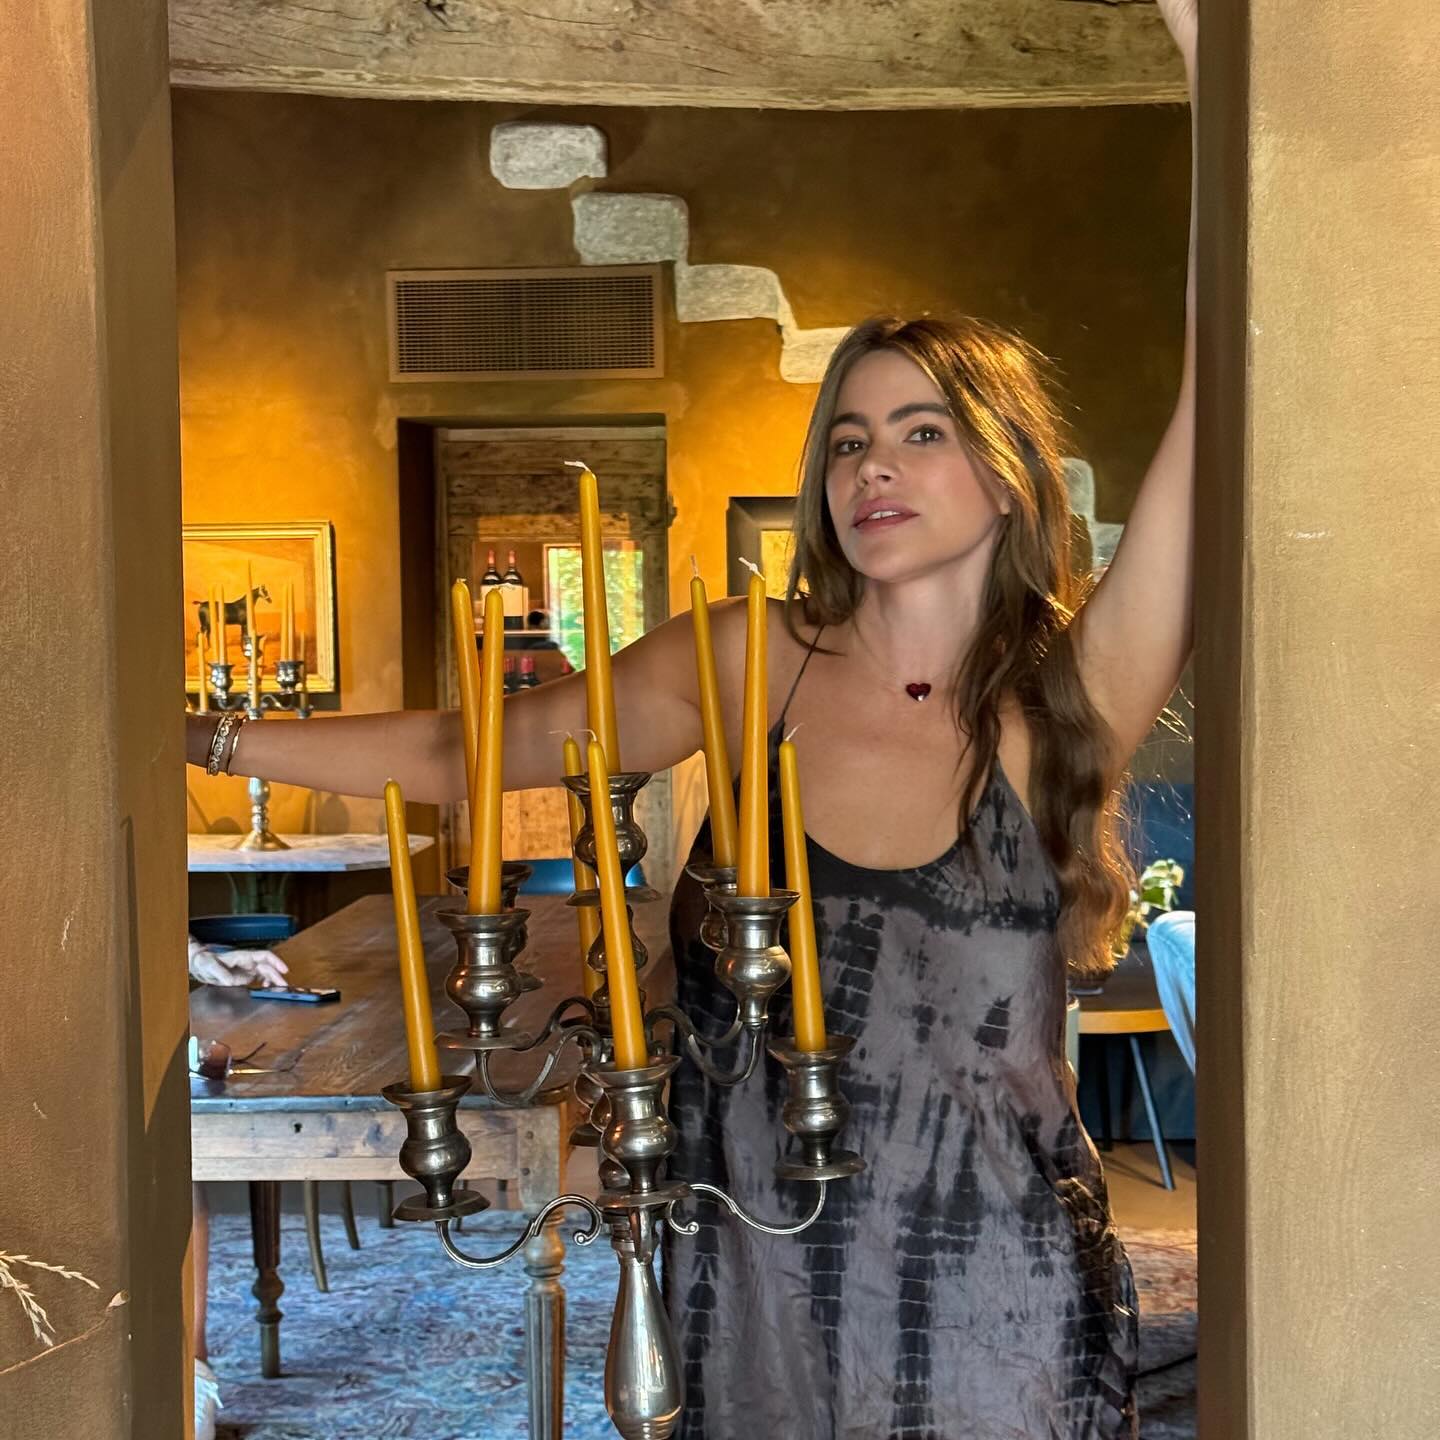 Sofia Vergara's Italian holiday comes a week after the actress celebrated her 52nd birthday